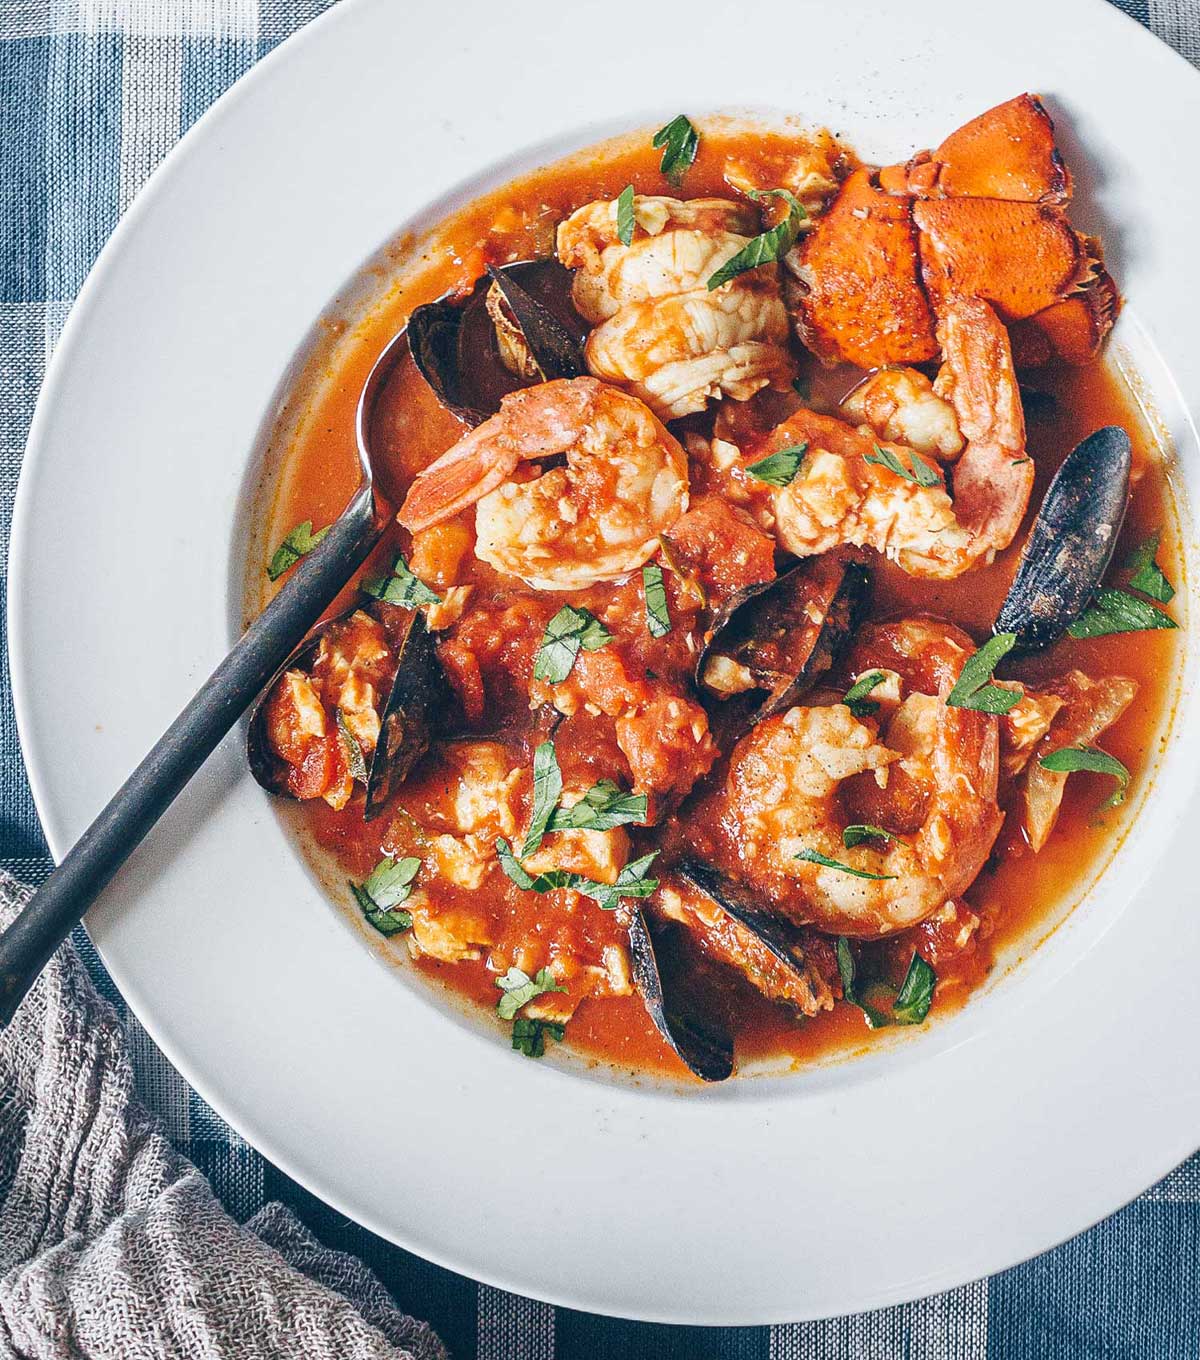 A large bowl of Fra Diavolo seafood stew, a tomato based stew with mounds of shrimp, mussels, calamari, and lobster tails.